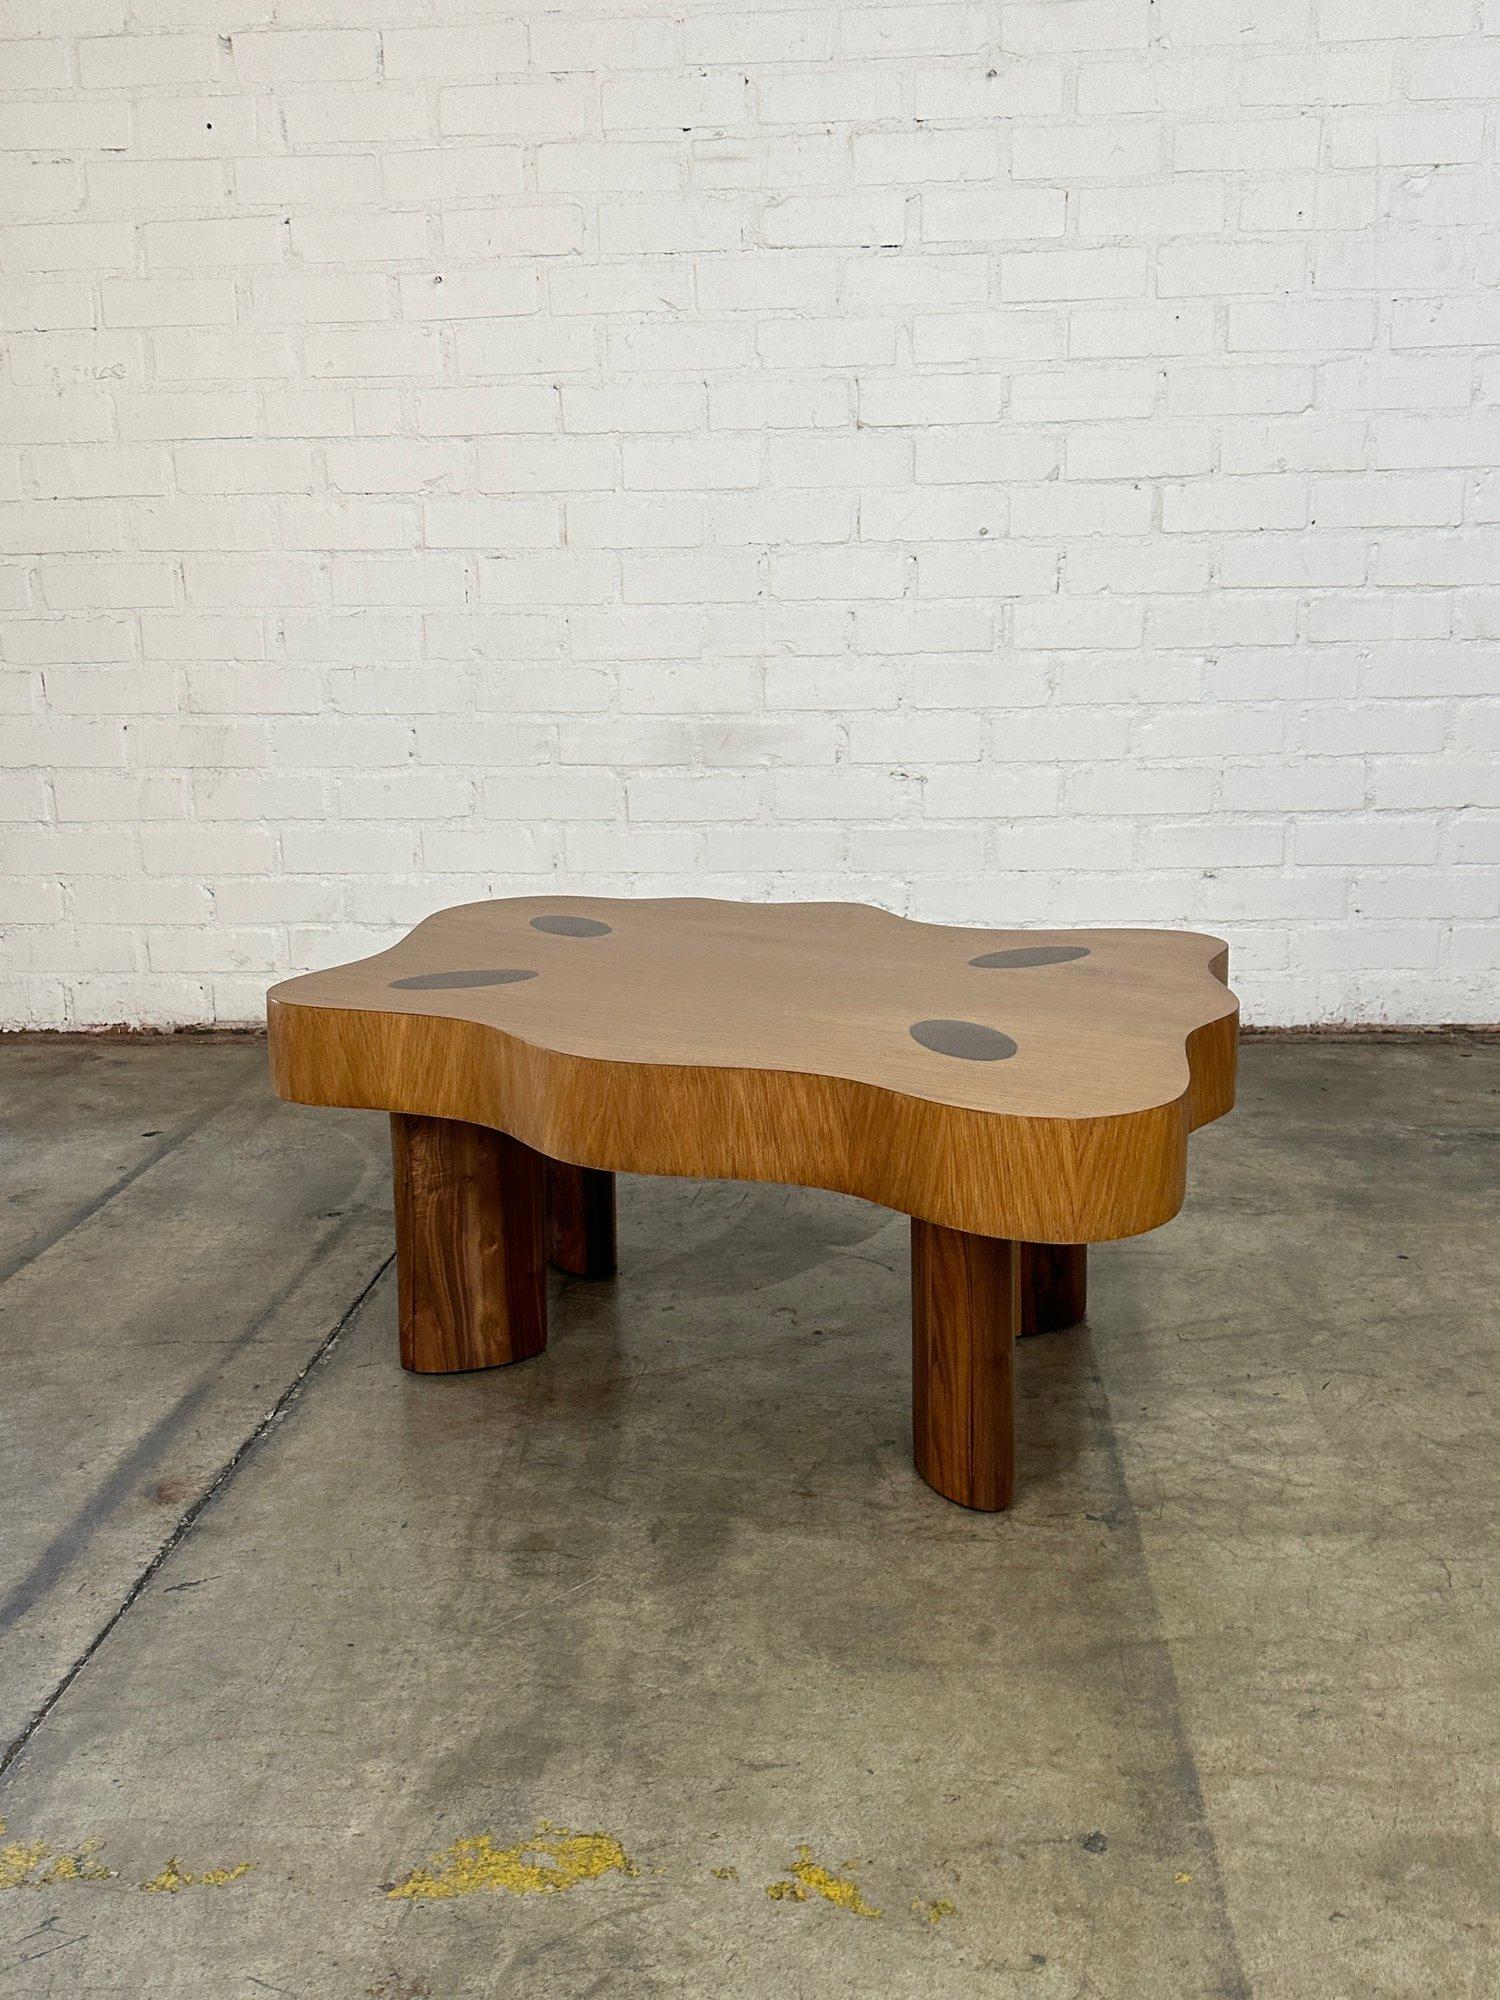 W51 D44 D27 H18

More compact version of our Free Form Coffee Table.

Made from a white oak veneer for the major of the surface with solid walnut oak legs that come up through the surface. This coffee table has been clear coated and shows natural